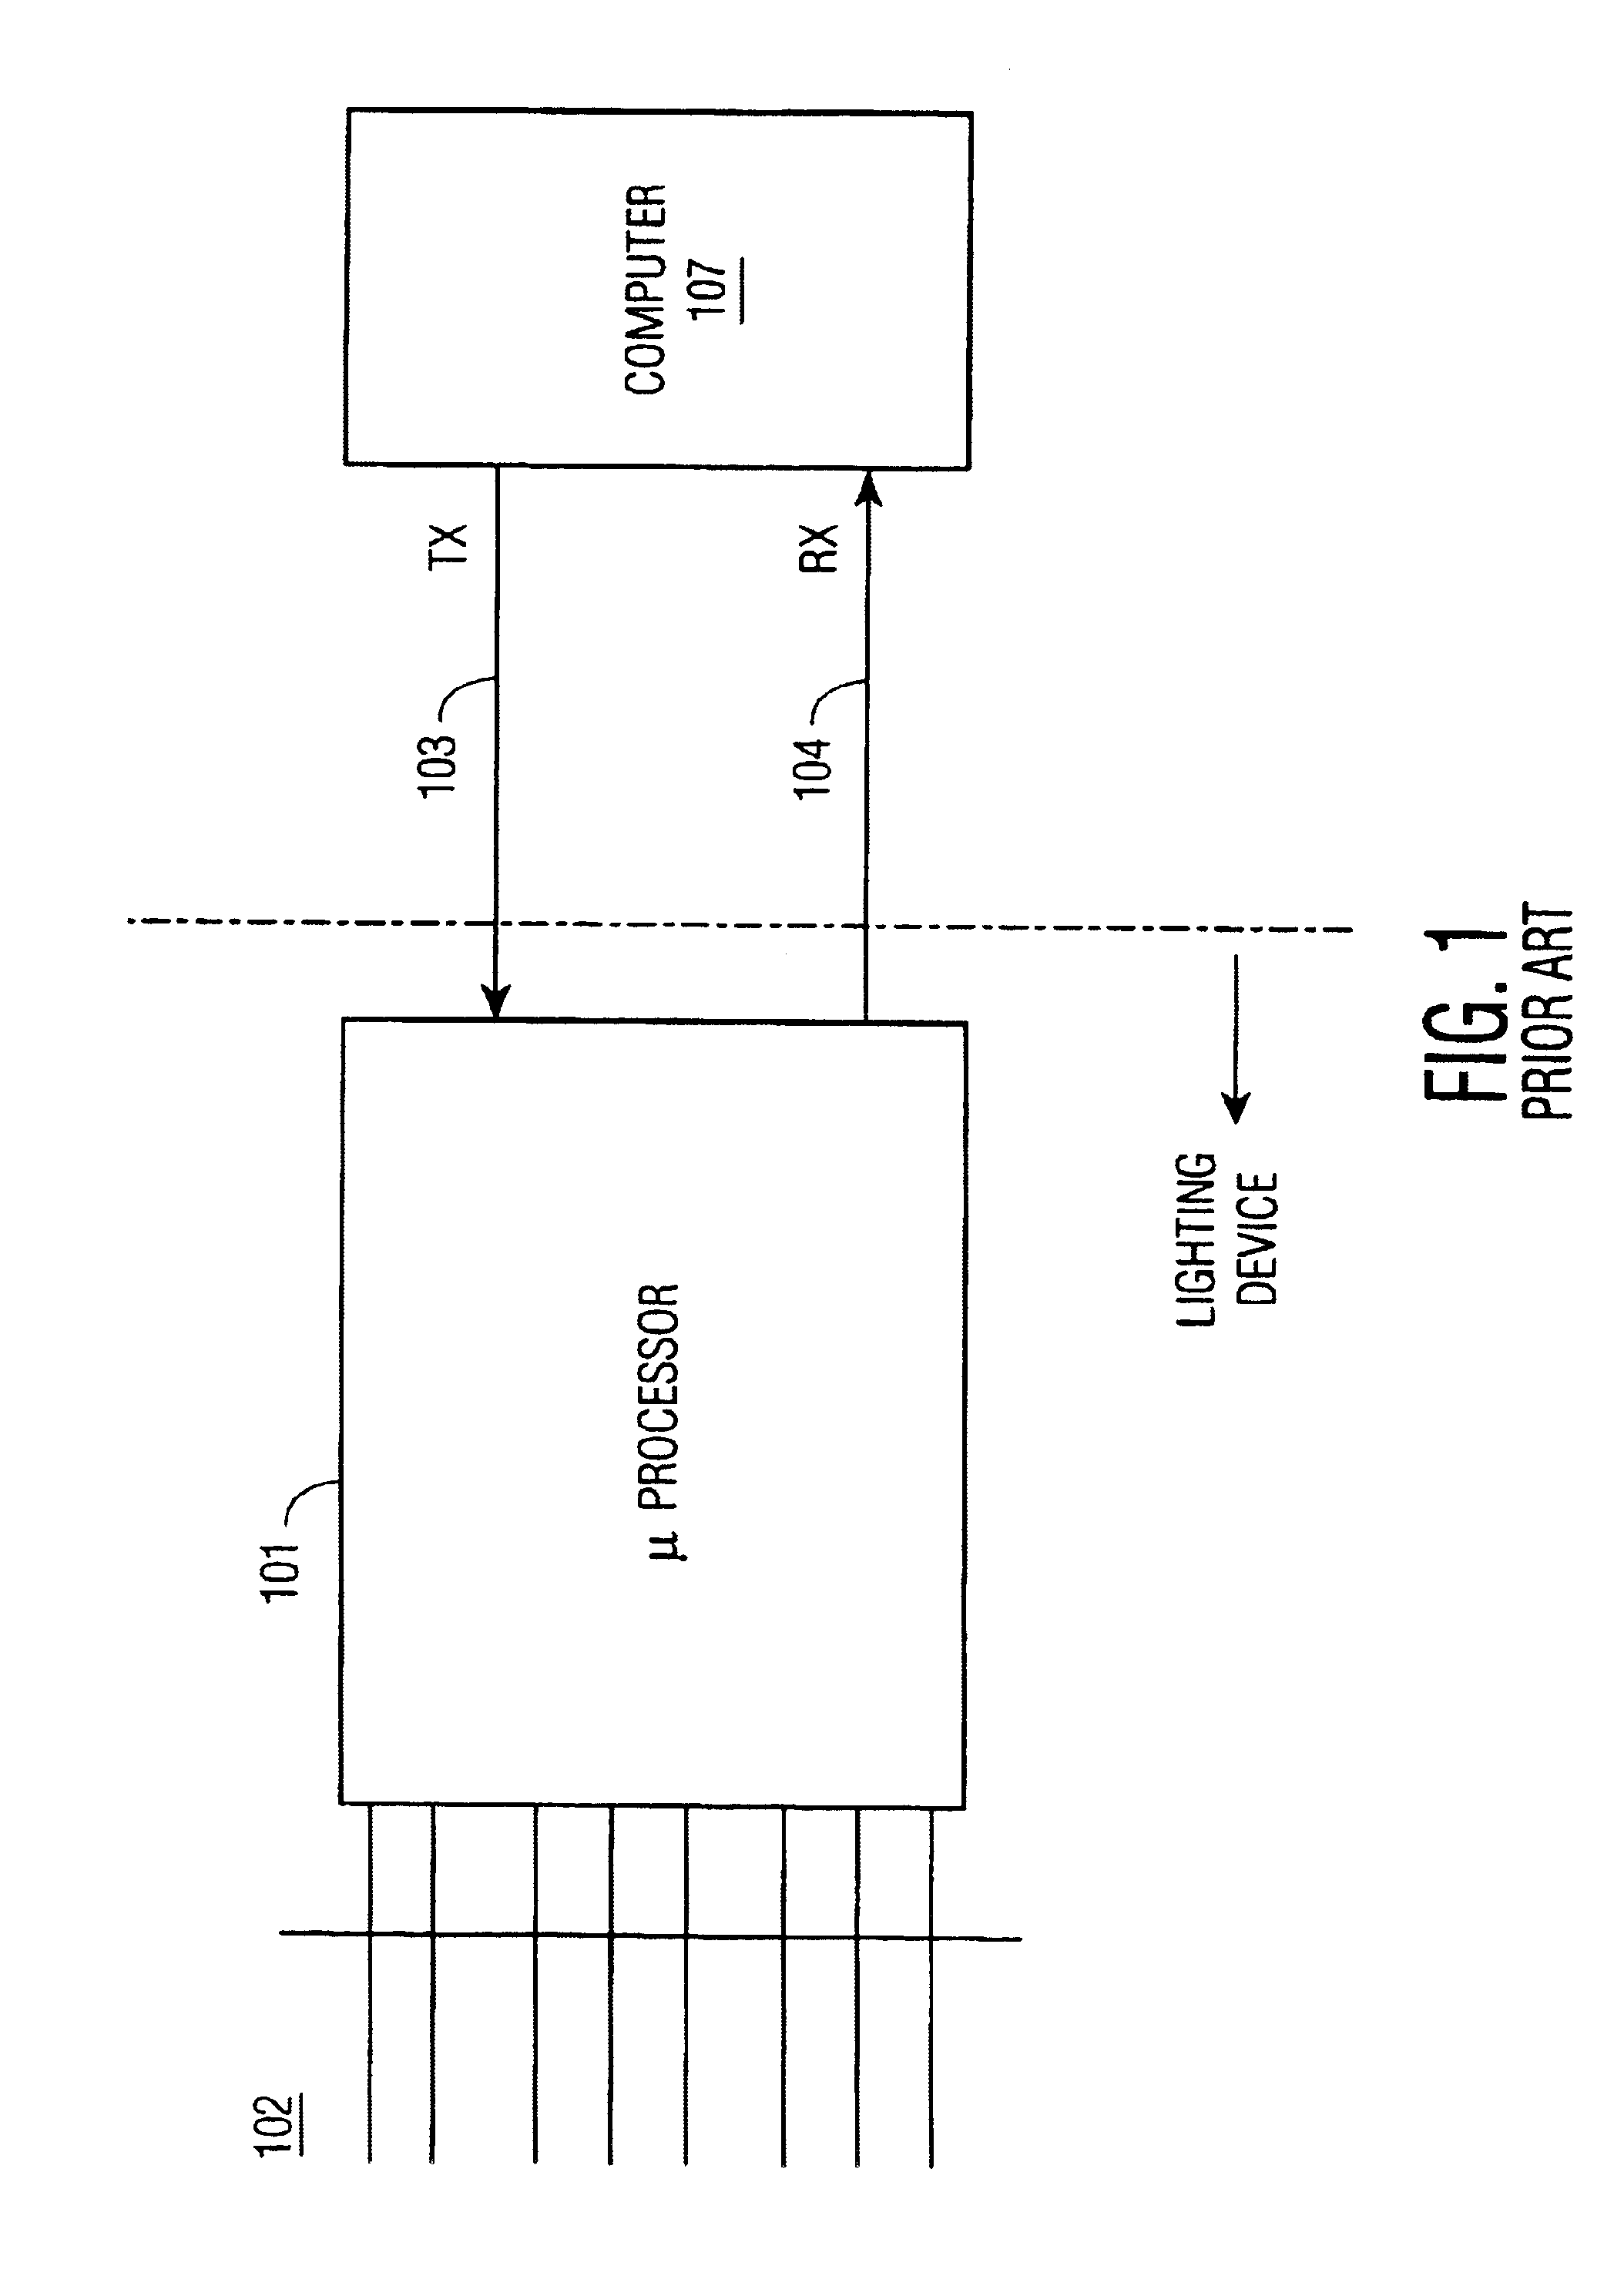 Communication port control module for lighting systems